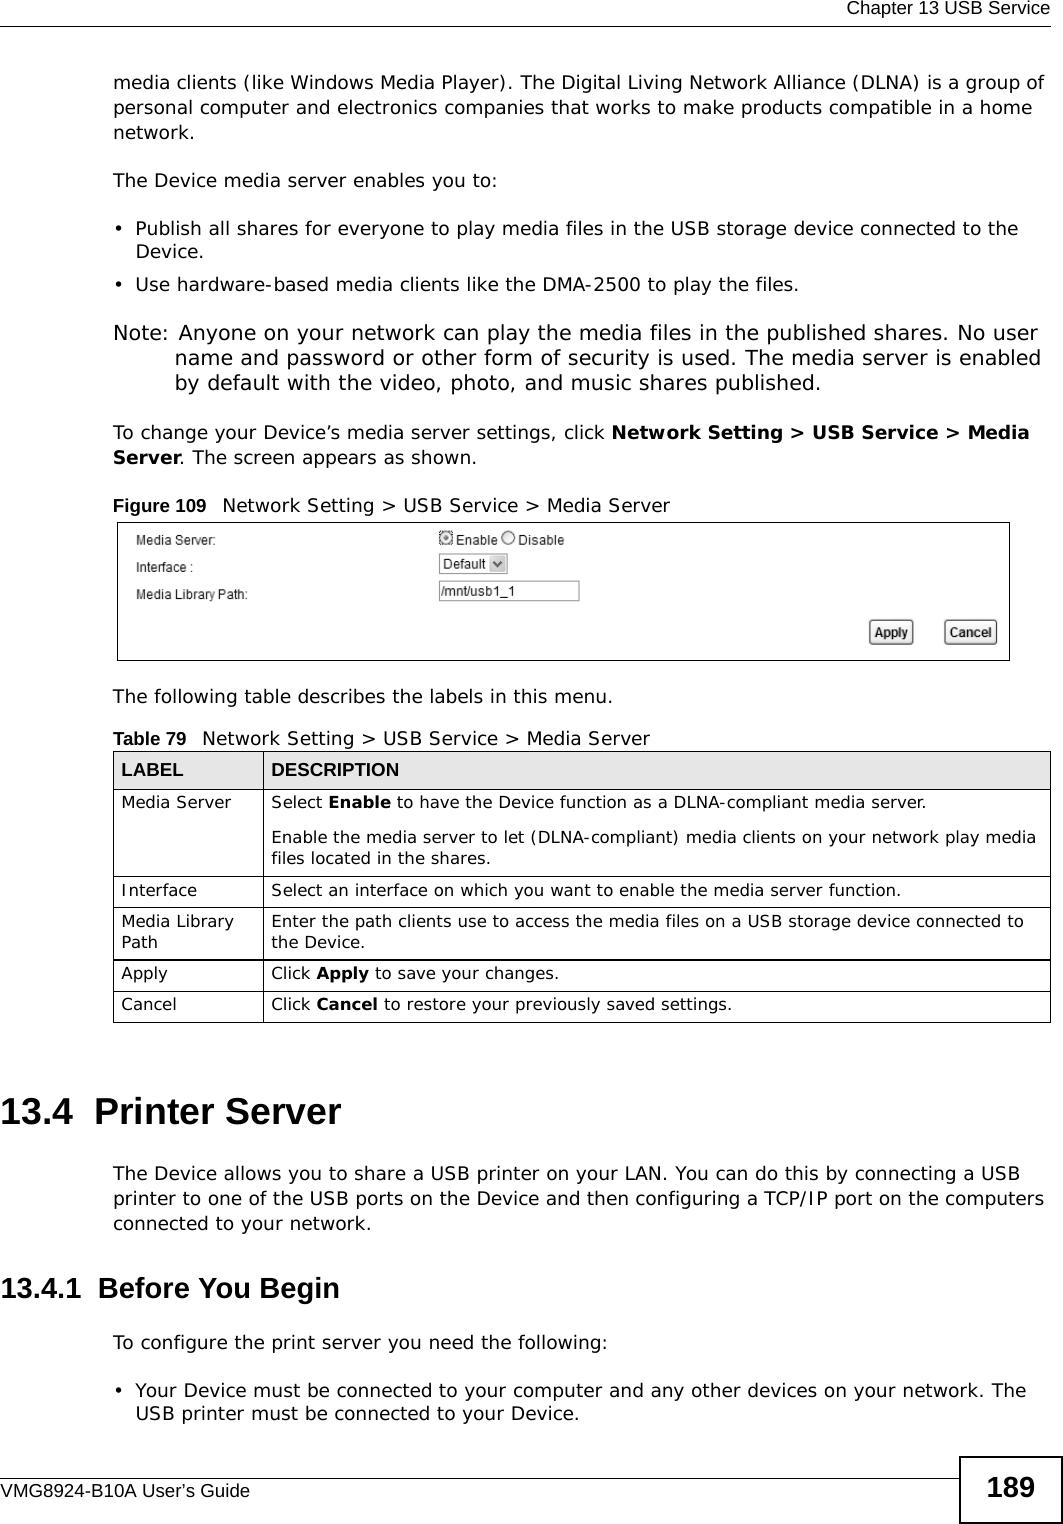  Chapter 13 USB ServiceVMG8924-B10A User’s Guide 189media clients (like Windows Media Player). The Digital Living Network Alliance (DLNA) is a group of personal computer and electronics companies that works to make products compatible in a home network.The Device media server enables you to:• Publish all shares for everyone to play media files in the USB storage device connected to the Device.• Use hardware-based media clients like the DMA-2500 to play the files. Note: Anyone on your network can play the media files in the published shares. No user name and password or other form of security is used. The media server is enabled by default with the video, photo, and music shares published. To change your Device’s media server settings, click Network Setting &gt; USB Service &gt; Media Server. The screen appears as shown.Figure 109   Network Setting &gt; USB Service &gt; Media ServerThe following table describes the labels in this menu.13.4  Printer Server The Device allows you to share a USB printer on your LAN. You can do this by connecting a USB printer to one of the USB ports on the Device and then configuring a TCP/IP port on the computers connected to your network. 13.4.1  Before You BeginTo configure the print server you need the following:• Your Device must be connected to your computer and any other devices on your network. The USB printer must be connected to your Device.Table 79   Network Setting &gt; USB Service &gt; Media ServerLABEL DESCRIPTIONMedia Server Select Enable to have the Device function as a DLNA-compliant media server.Enable the media server to let (DLNA-compliant) media clients on your network play media files located in the shares. Interface Select an interface on which you want to enable the media server function.Media Library Path Enter the path clients use to access the media files on a USB storage device connected to the Device.Apply Click Apply to save your changes.Cancel Click Cancel to restore your previously saved settings.